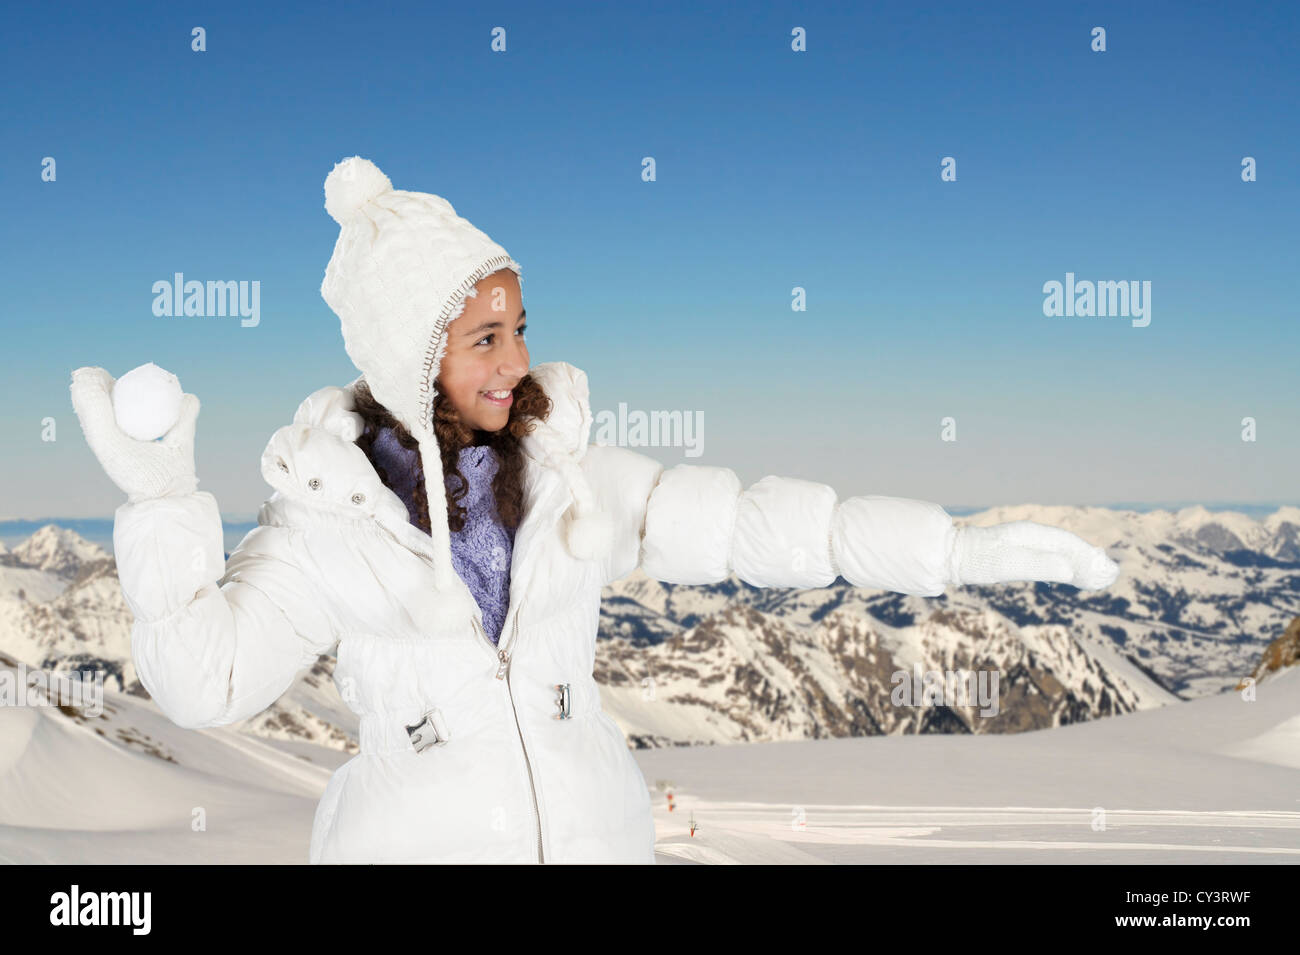 winter fun, girl throwing a snow ball. Mountains in the background Stock Photo